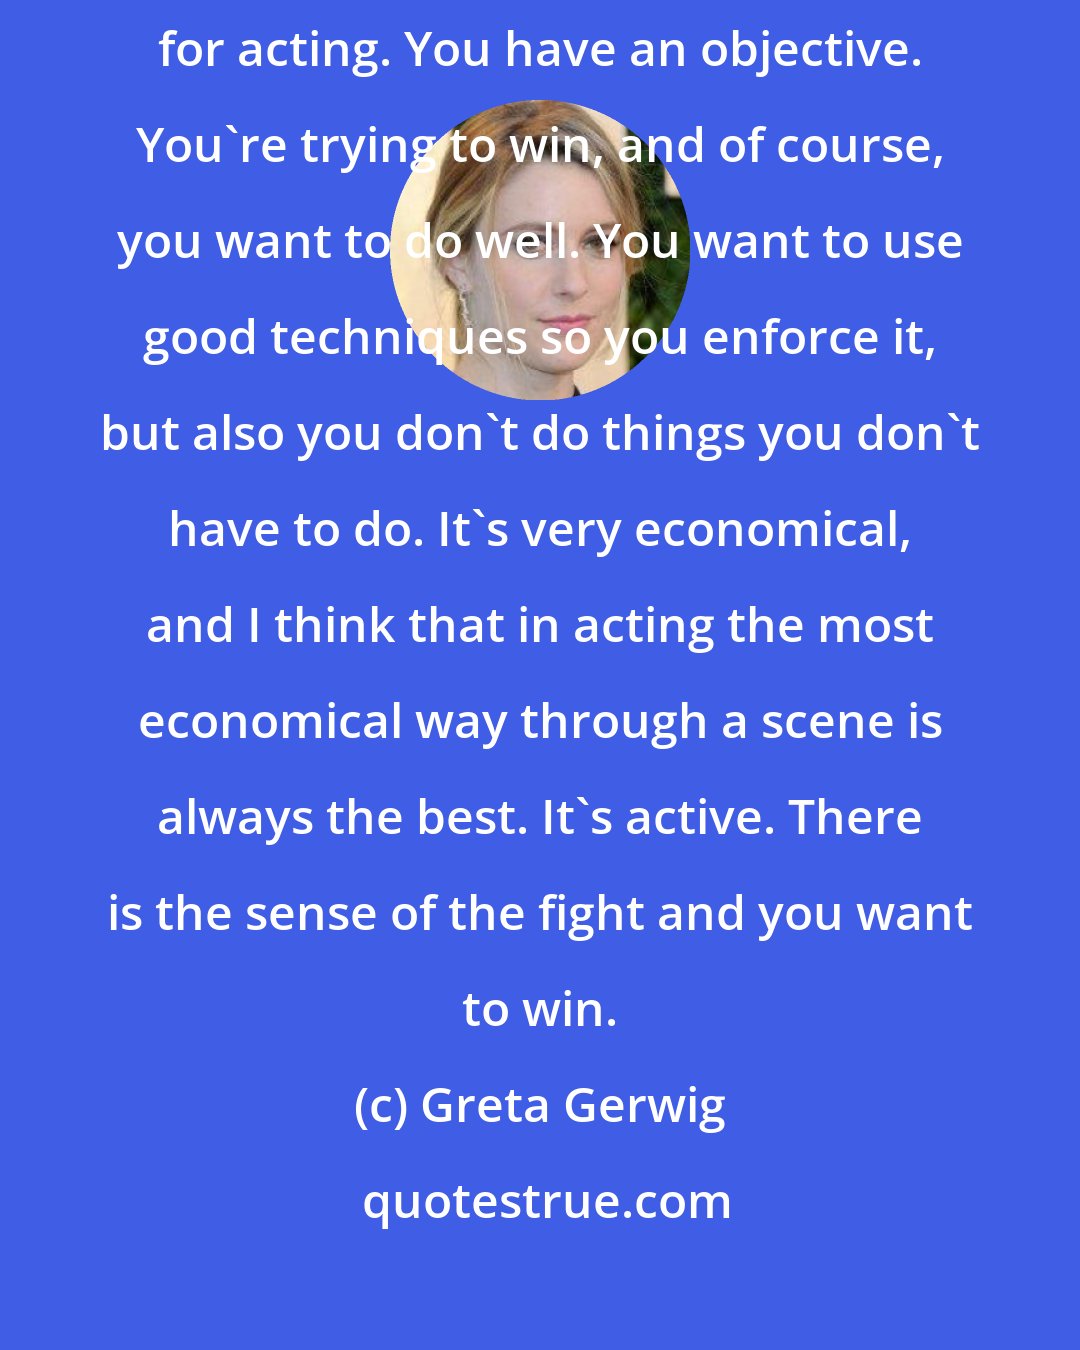 Greta Gerwig: There's an economy in sports that I always think is a useful metaphor for acting. You have an objective. You're trying to win, and of course, you want to do well. You want to use good techniques so you enforce it, but also you don't do things you don't have to do. It's very economical, and I think that in acting the most economical way through a scene is always the best. It's active. There is the sense of the fight and you want to win.